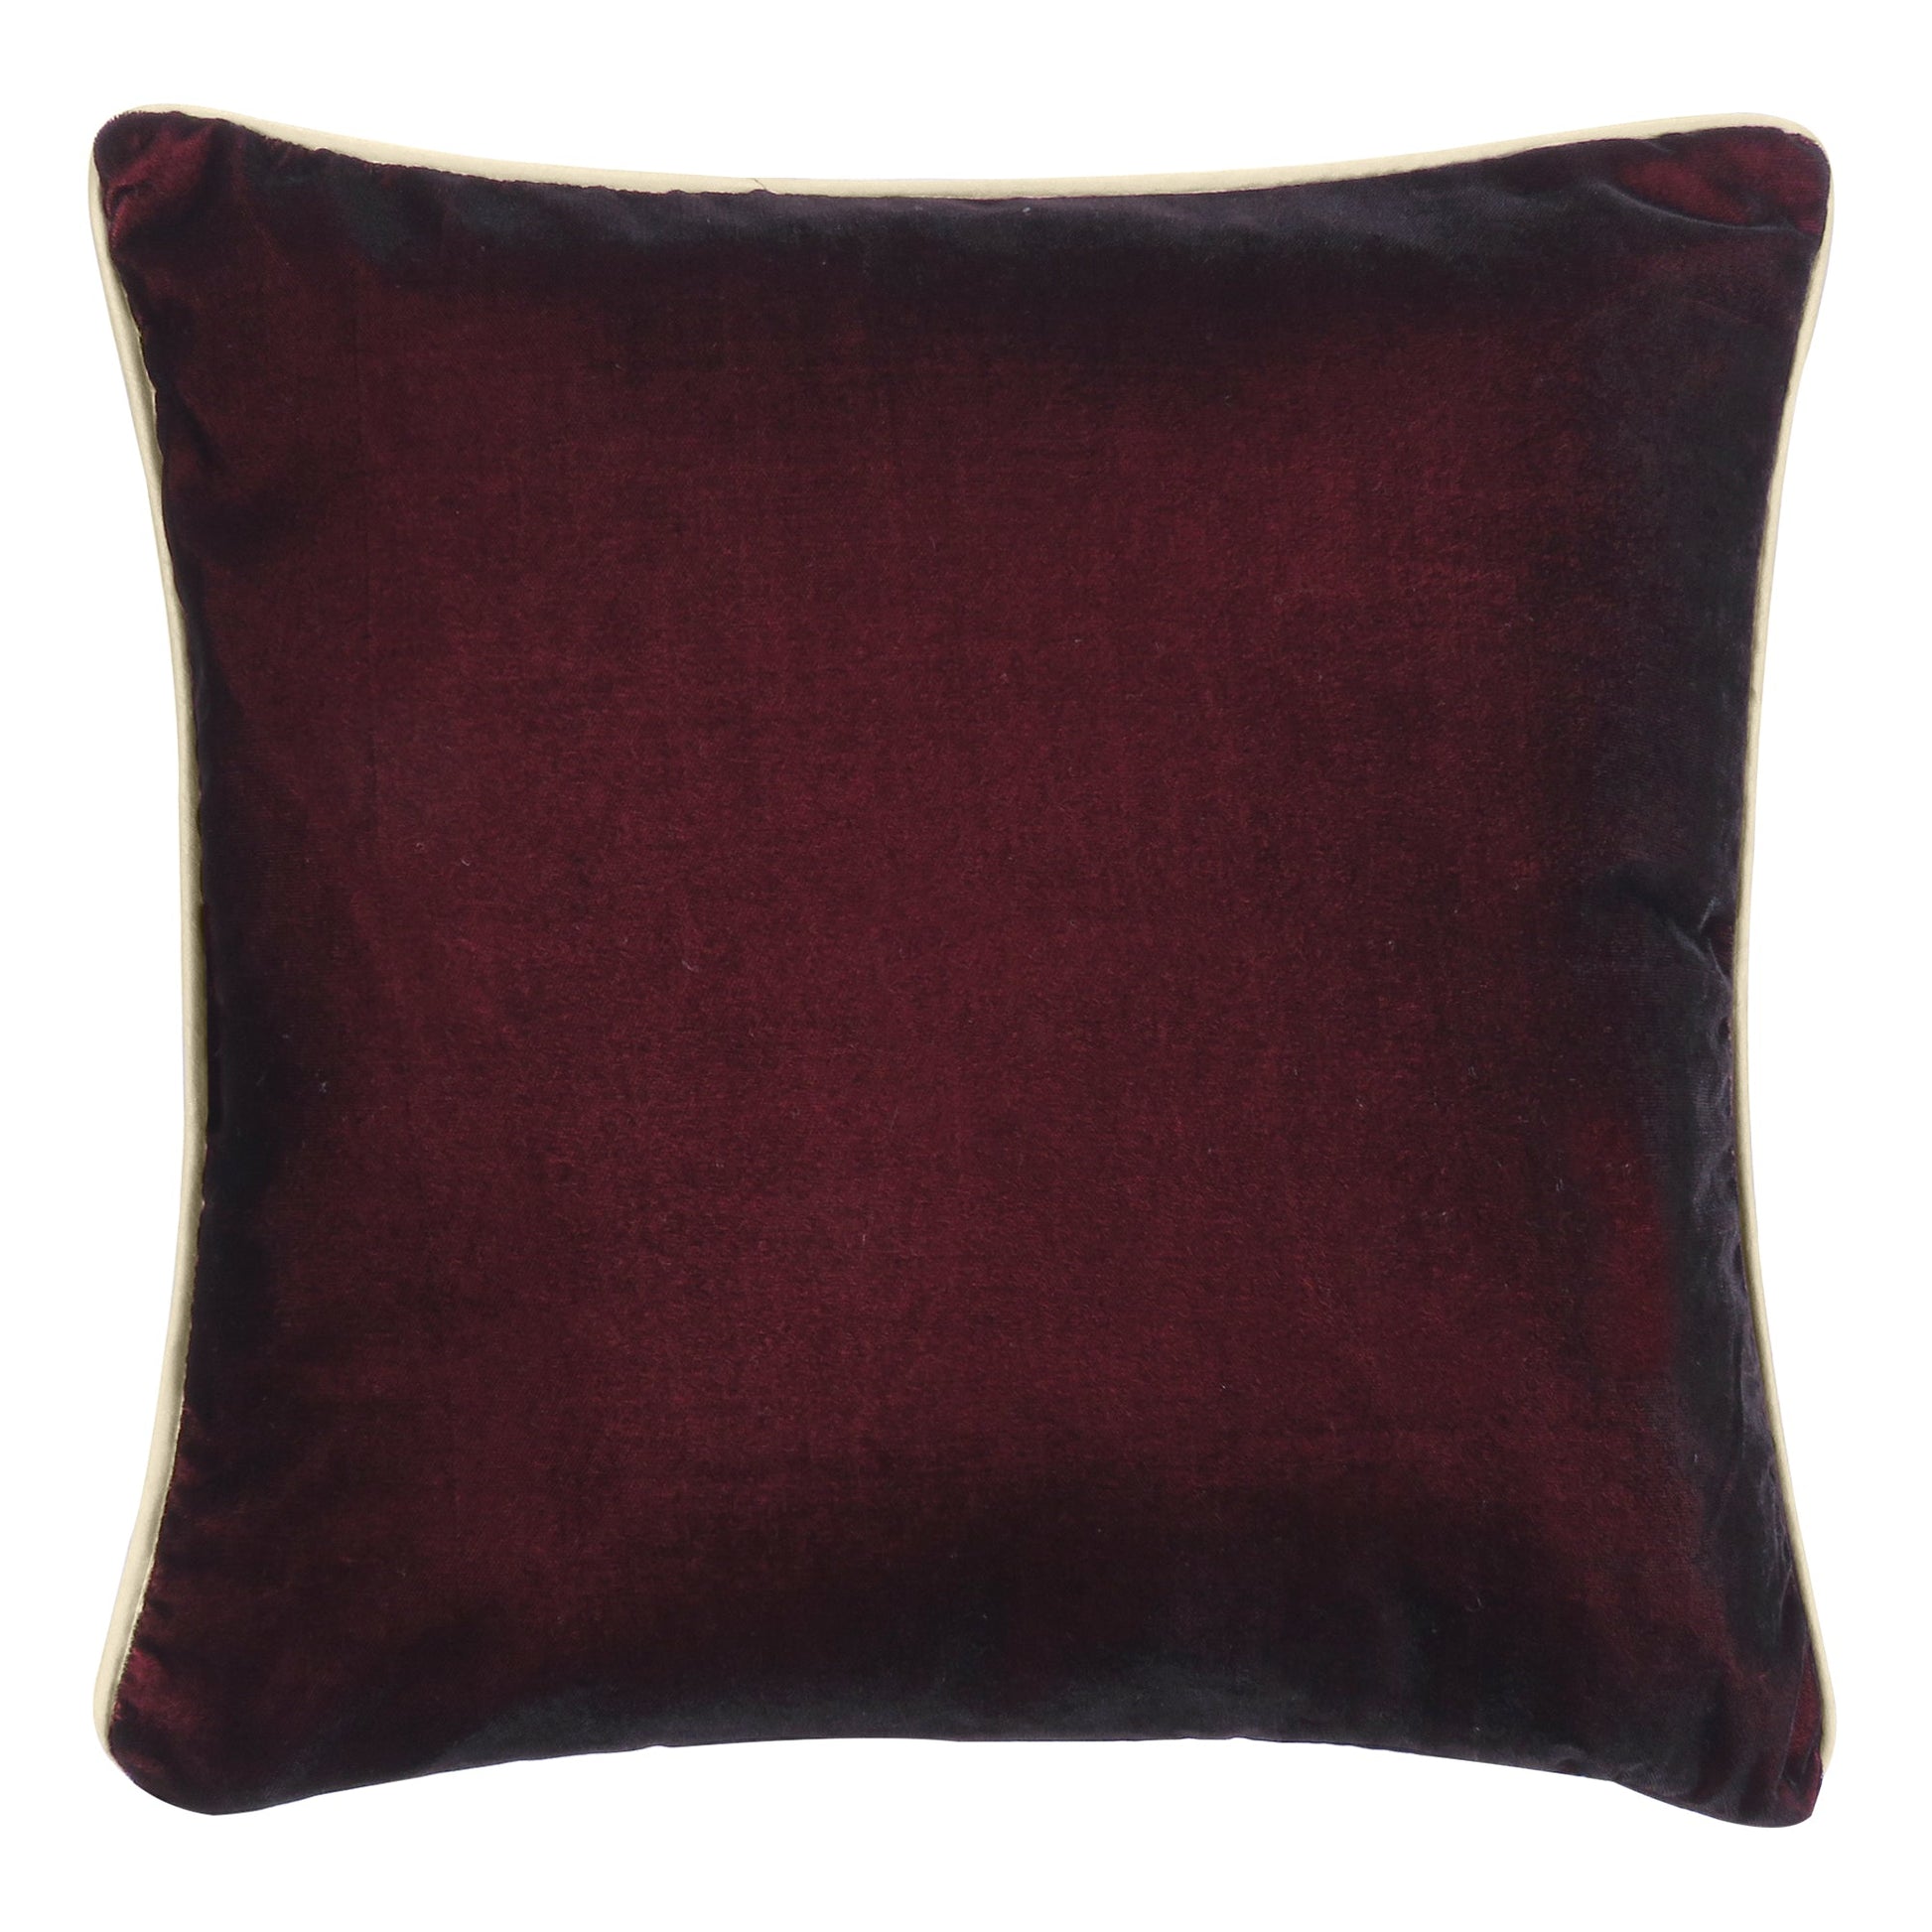 Jester Red Velvet Cushion Cover with Off White Piping Edge in Set of 2